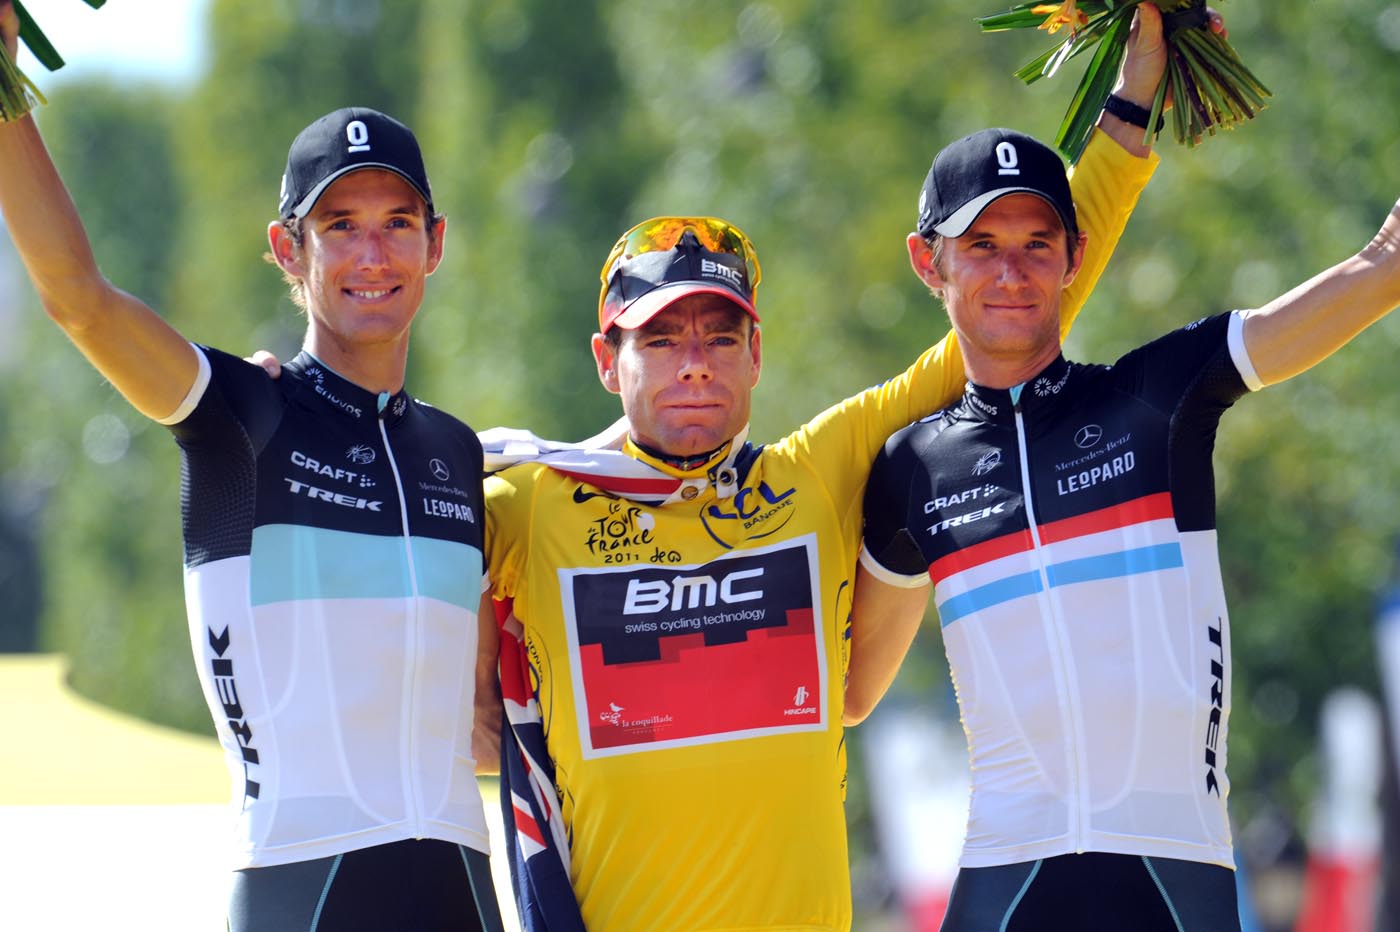 bus bag fup Evans wins 2011 Tour de France overall as Cavendish clinches green jersey |  Cycling Weekly